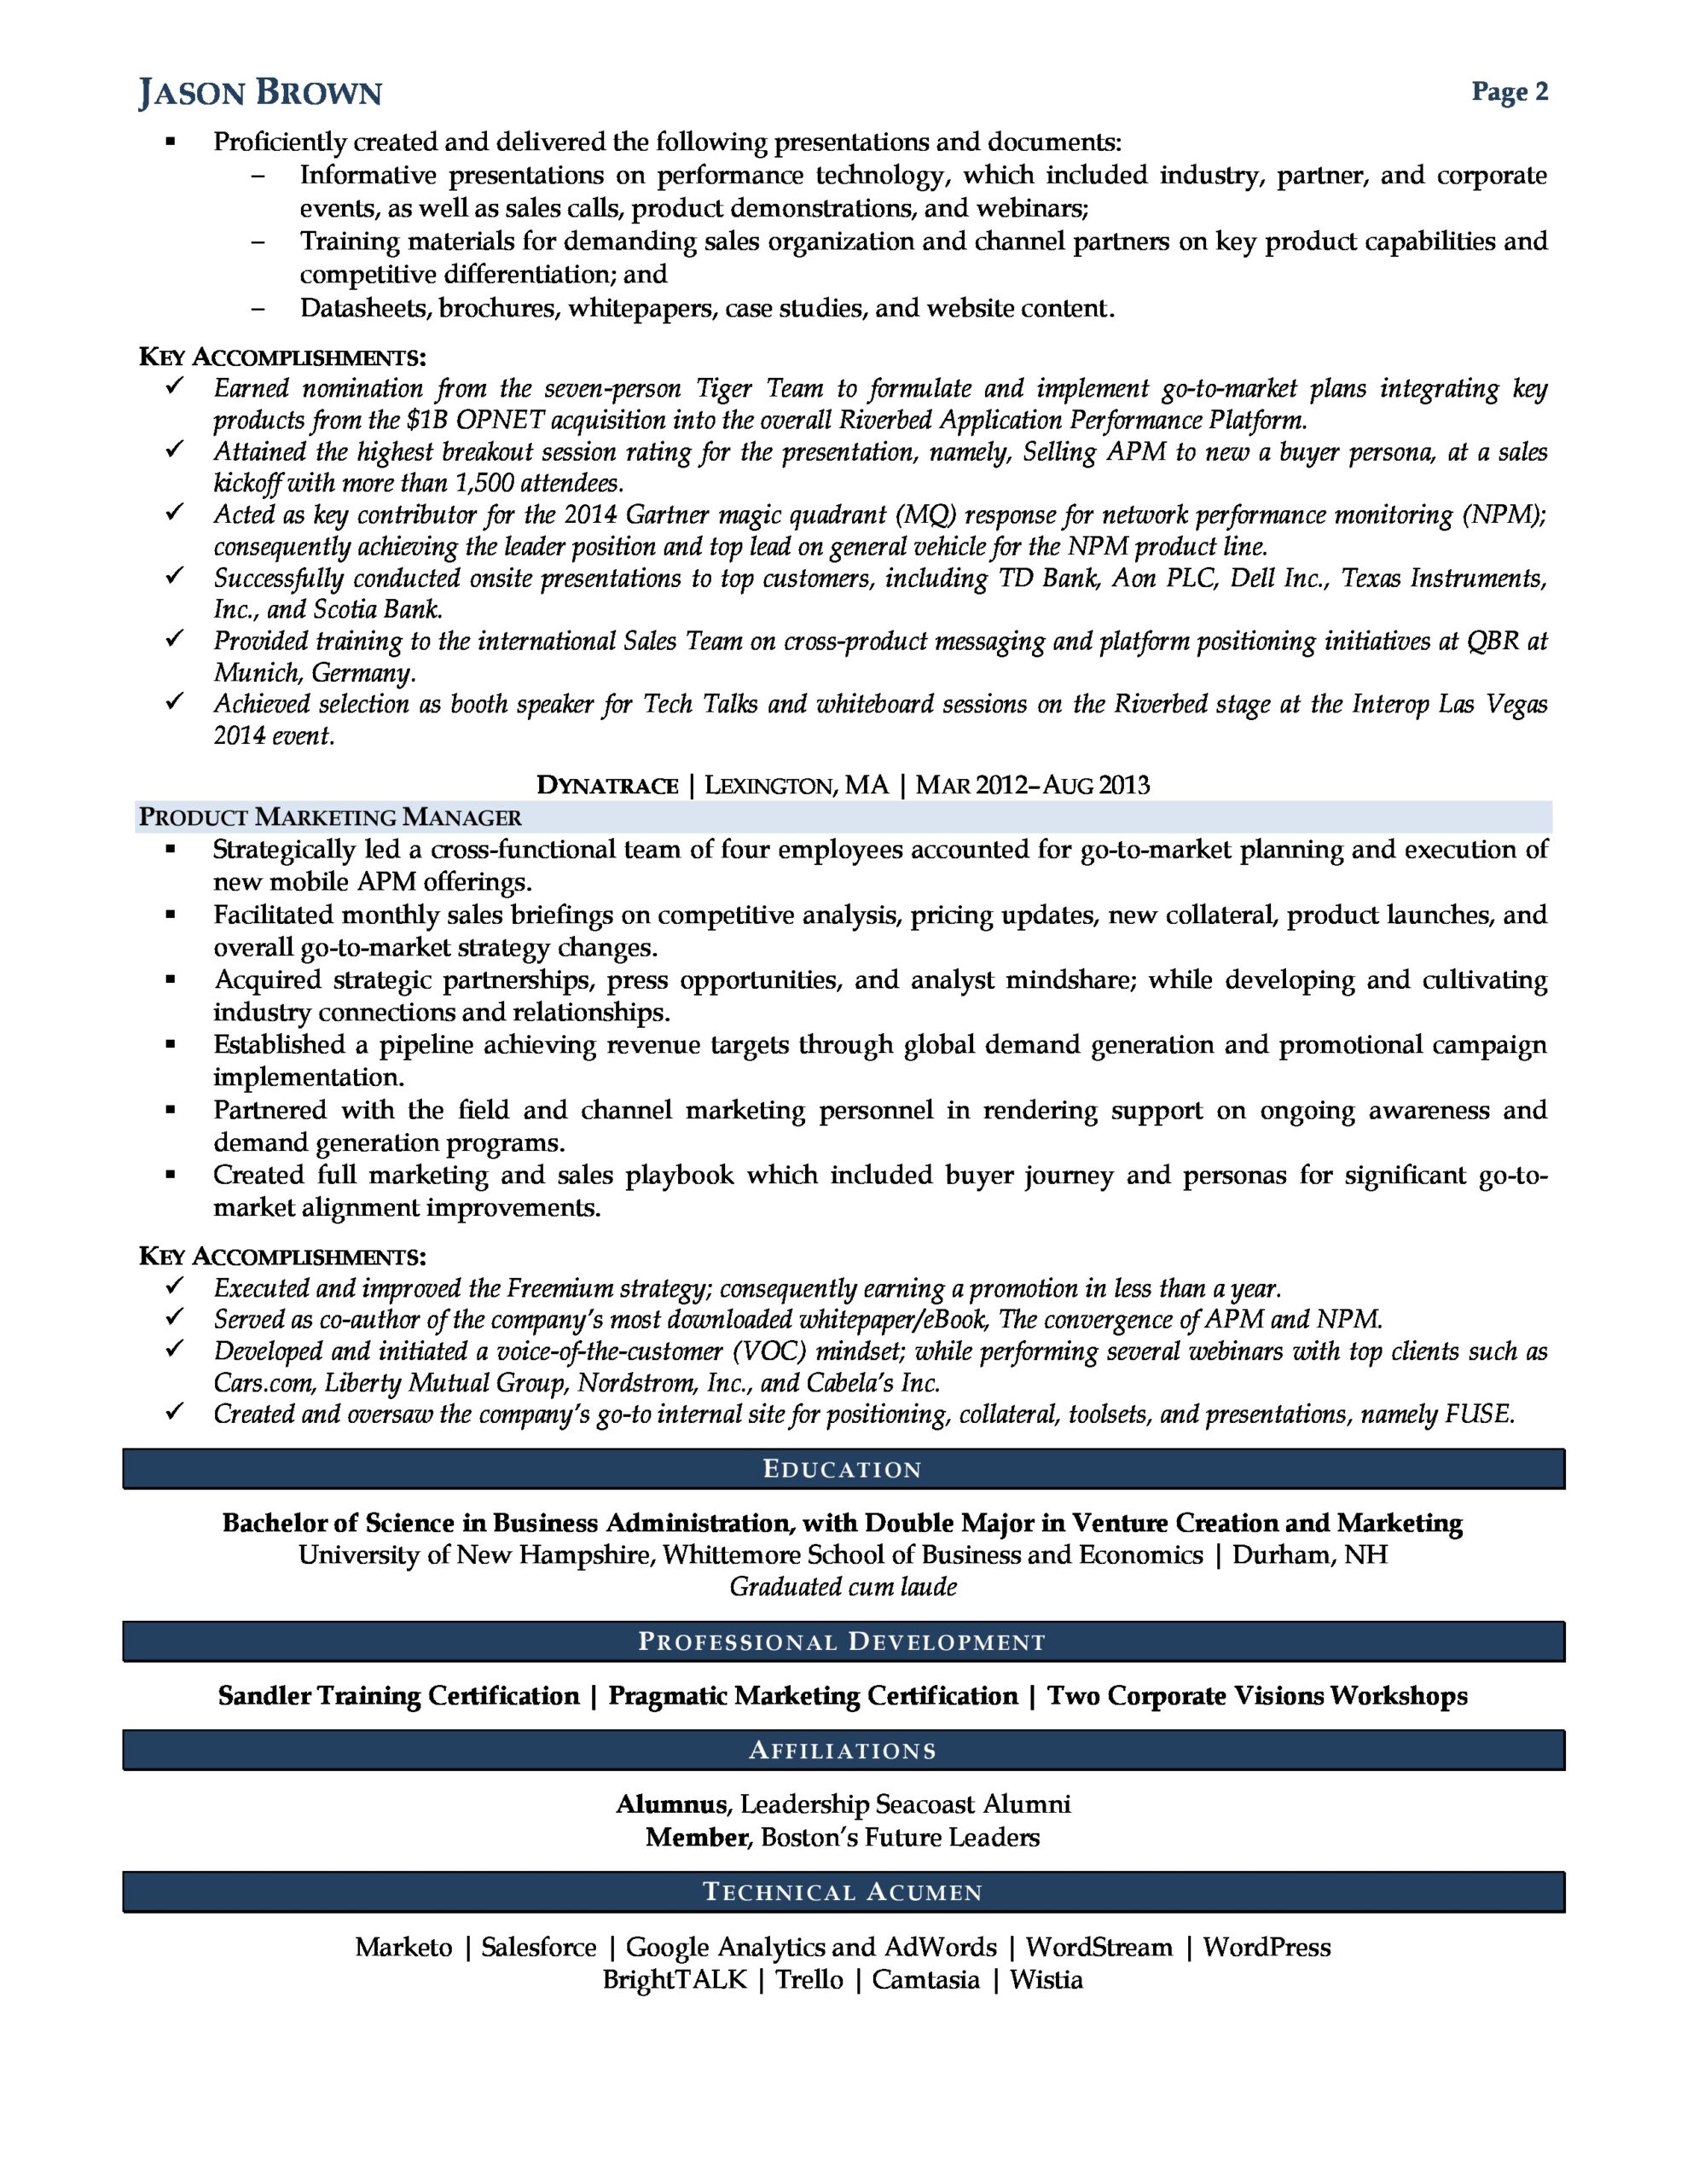 Product Marketing Manager Resume Examples Rpw Resume Sample